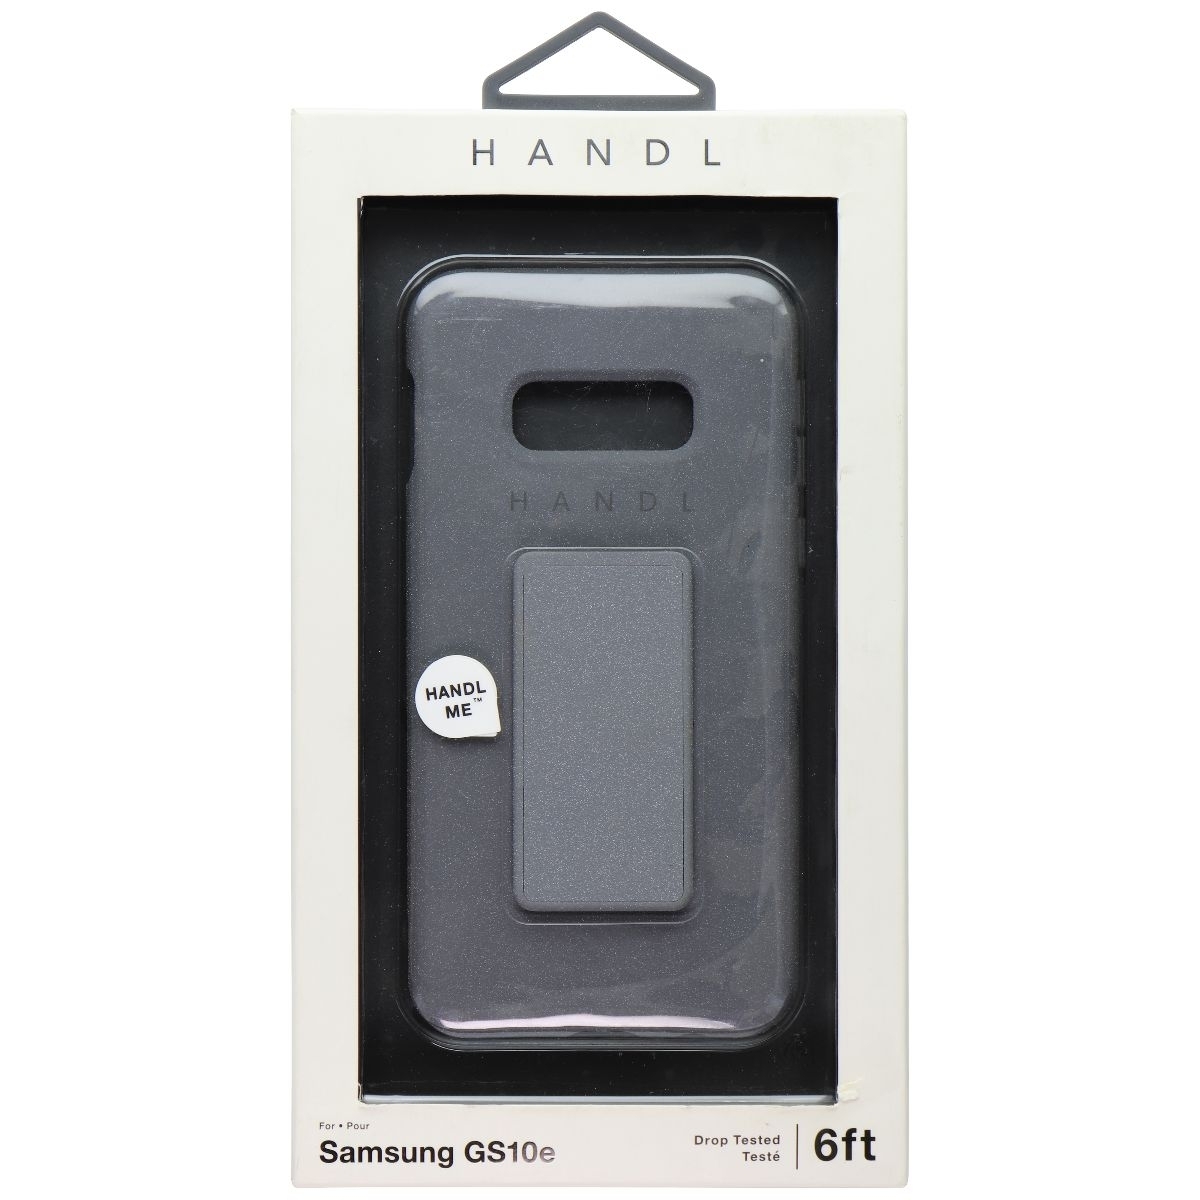 HANDL Slim Case With Handle Grip For Samsung Galaxy S10e - Gray (Refurbished)